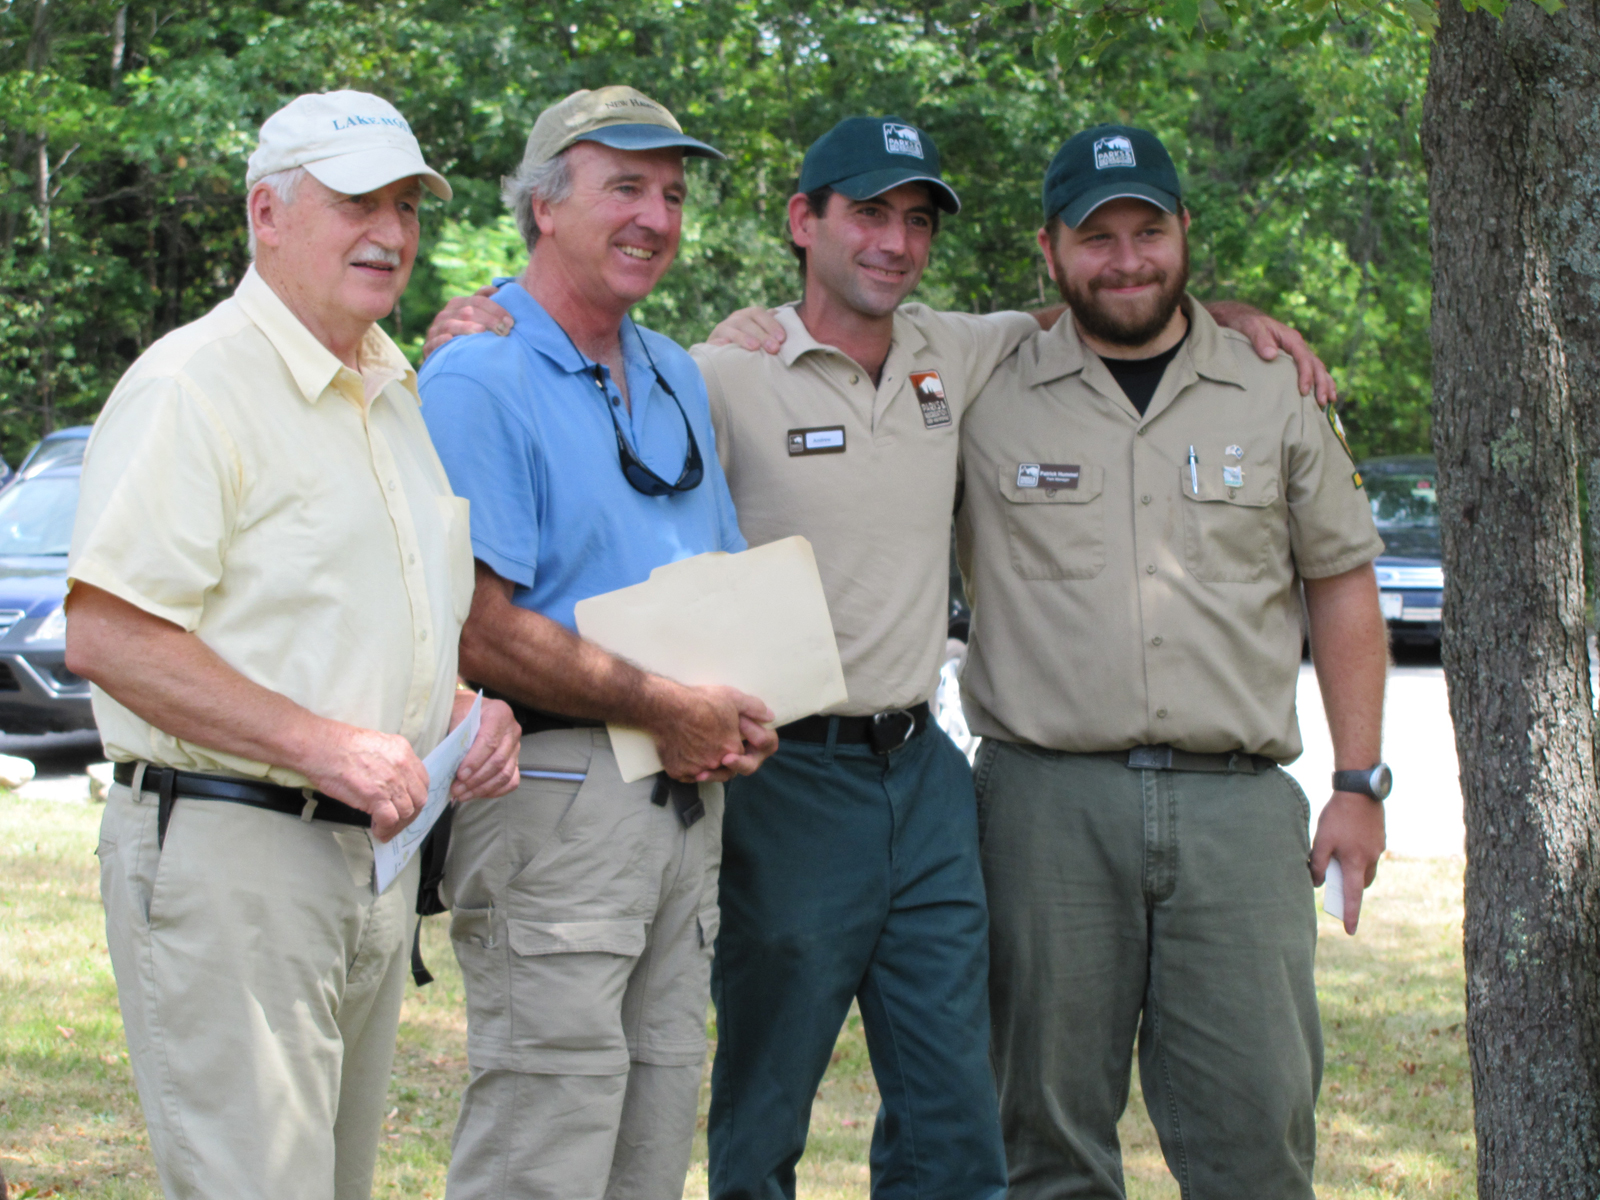 The Monadnock Managers at the opening ceremony for Gilson Pond Campground. From left to right, Charlie Royce, Ben Haubrich, Andrew Zboray, and Patrick Hummel. Photo courtesy of NH State Parks. 